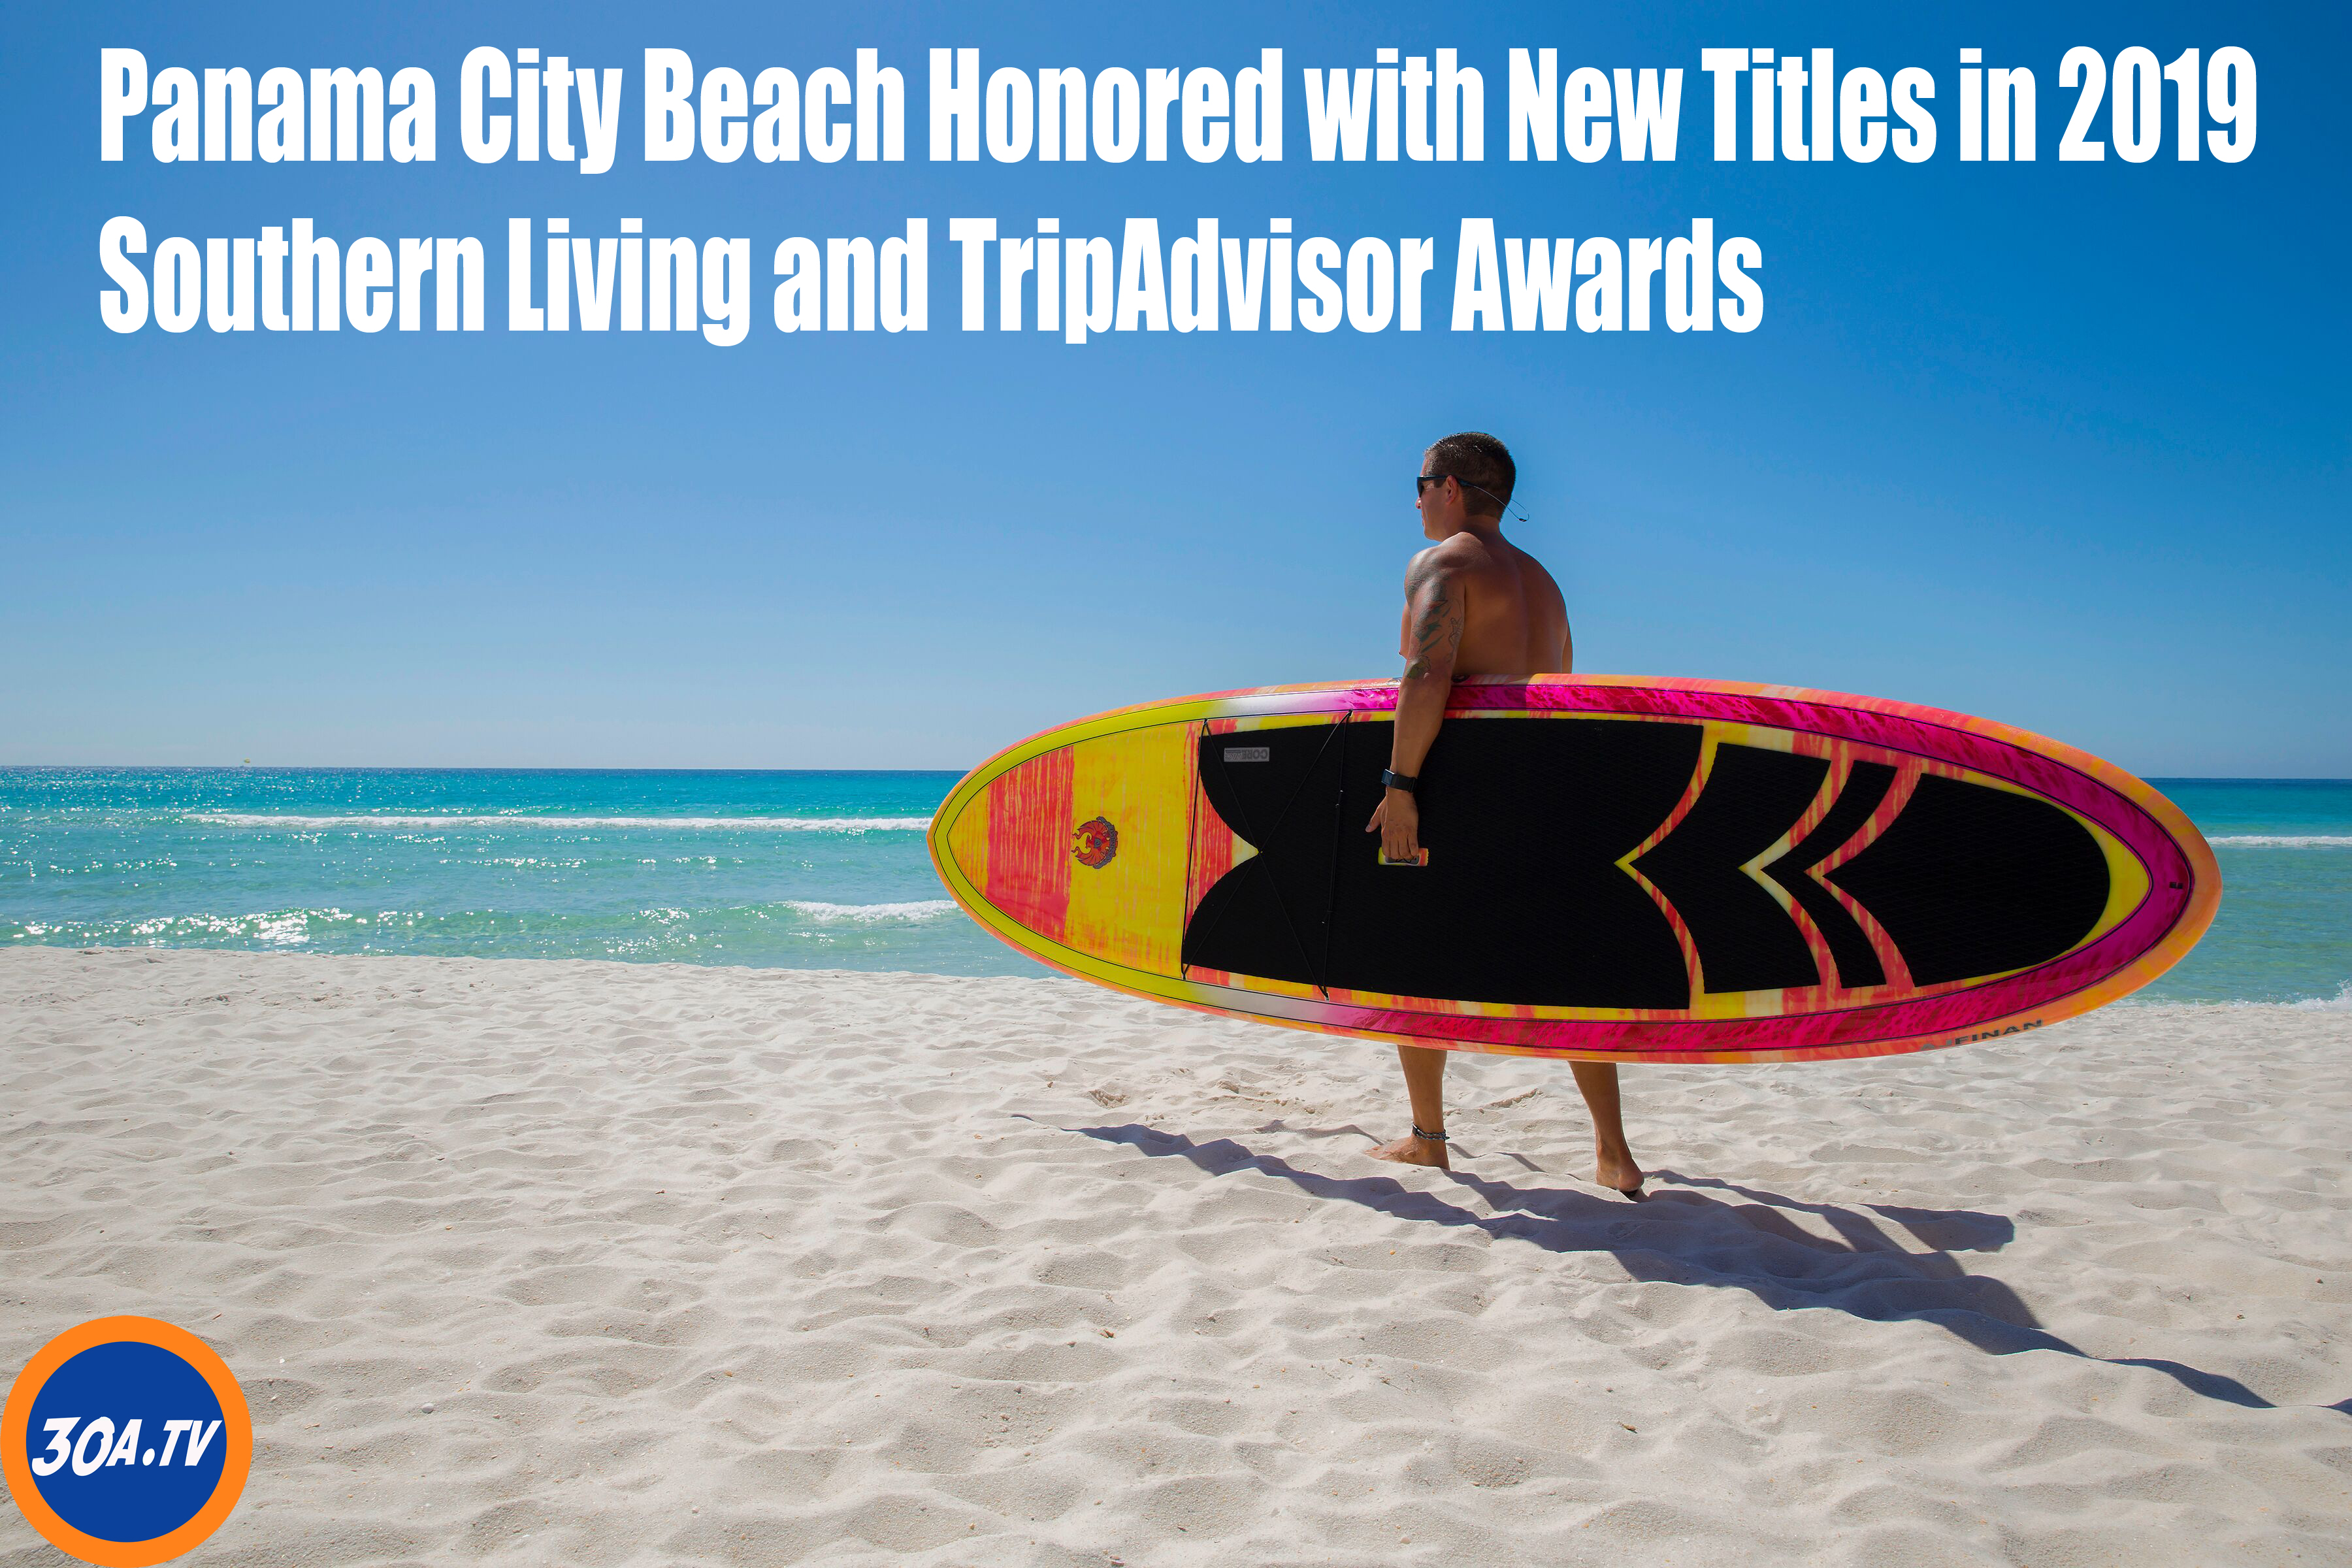 Panama City Beach Honored with New Titles in 2019